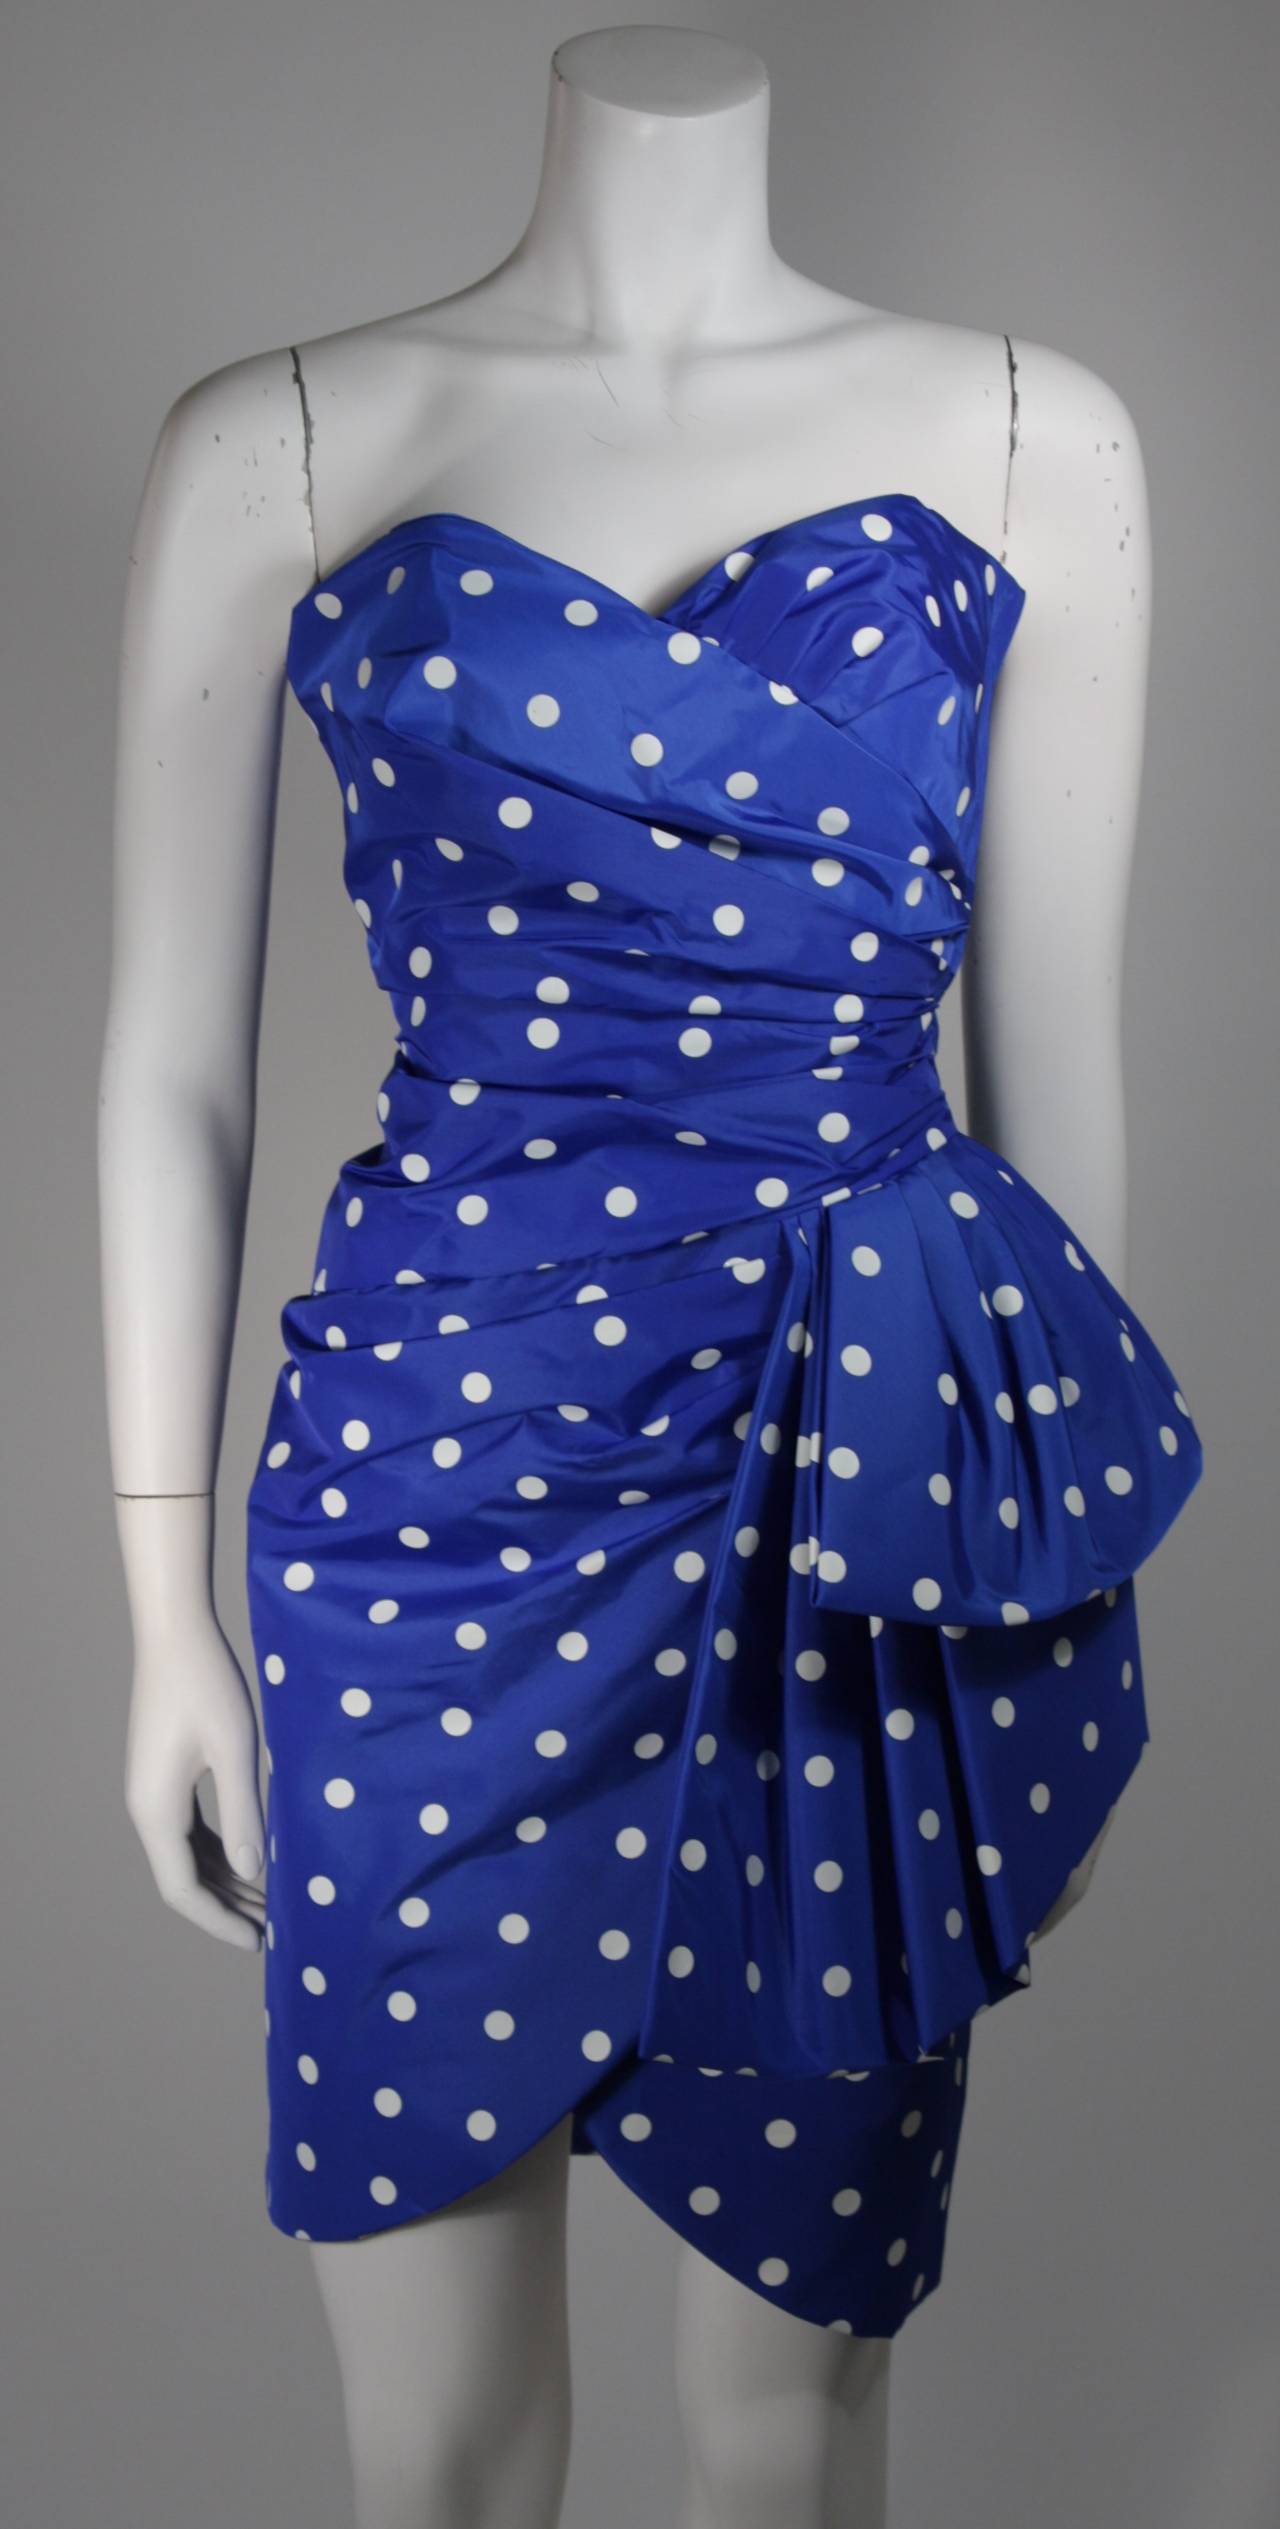 Purple Victor Costa Royal Blue and White Polka Dot Cocktail Dress Size 8